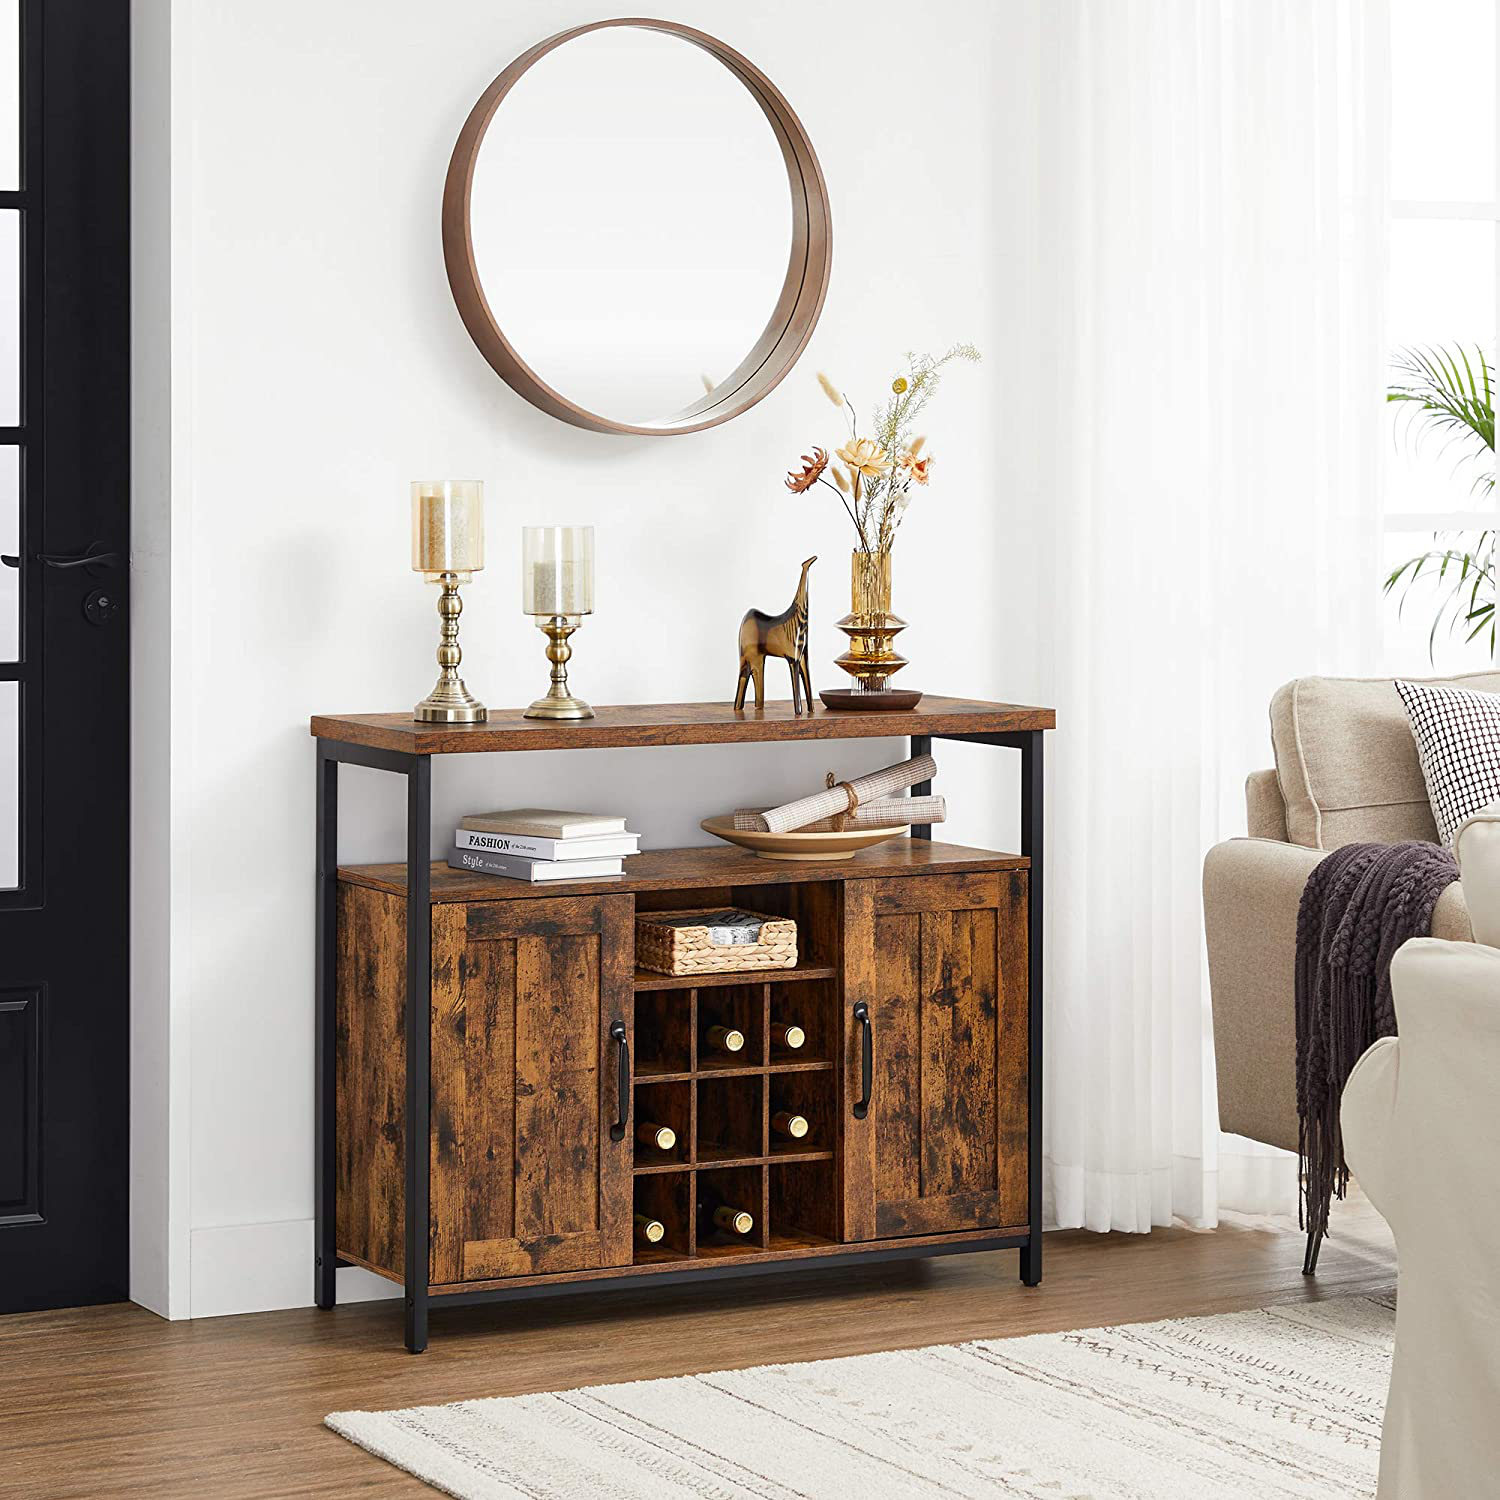 Rena Sideboard and Buffet Table with Wine Holder